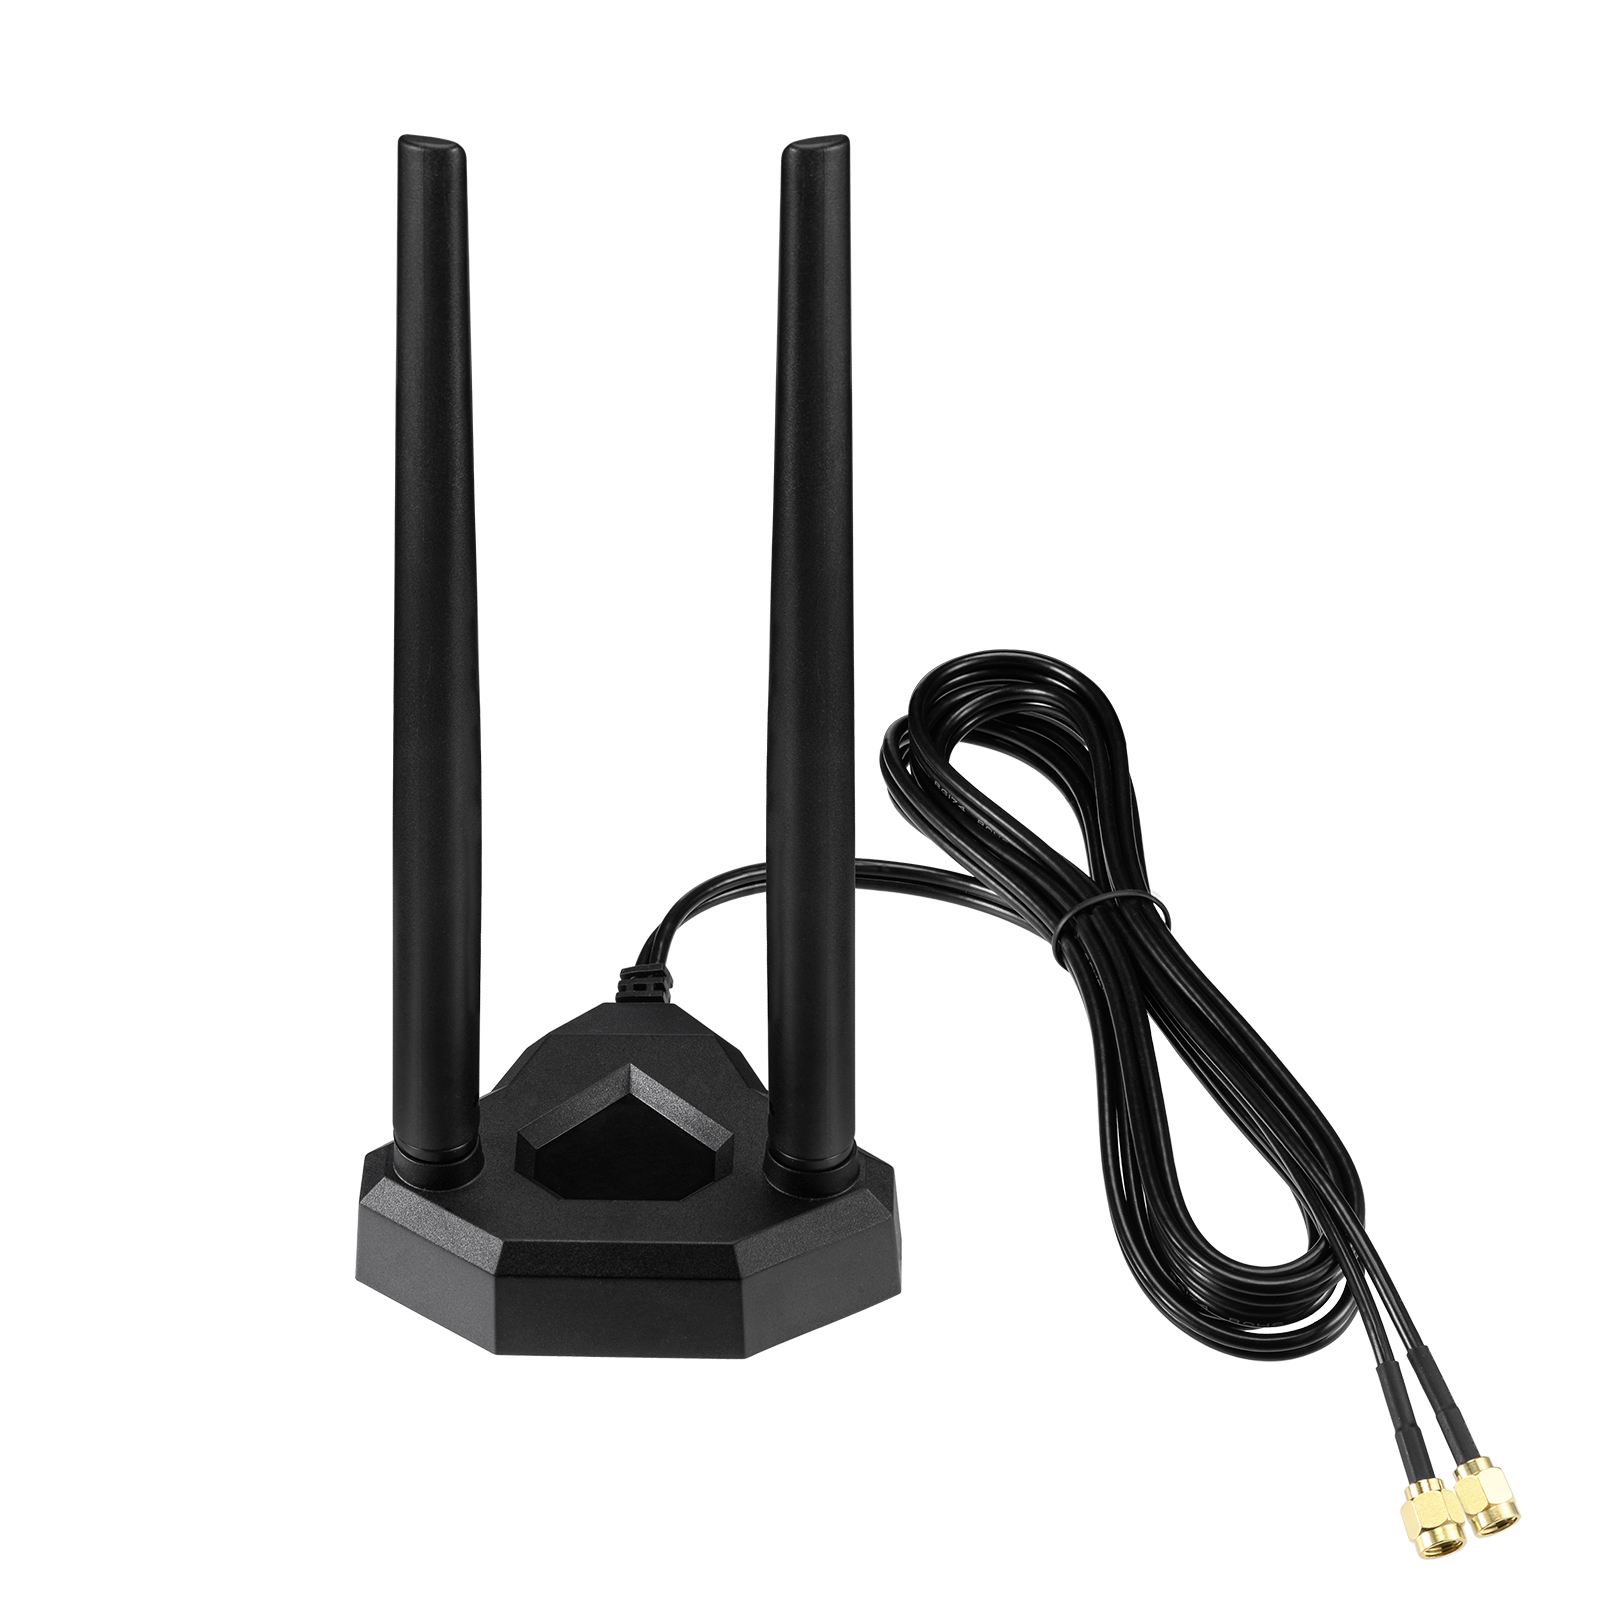 6dBi WiFi RP-SMA Dual Band Antenna for A B G N AC Network Extension Routers 